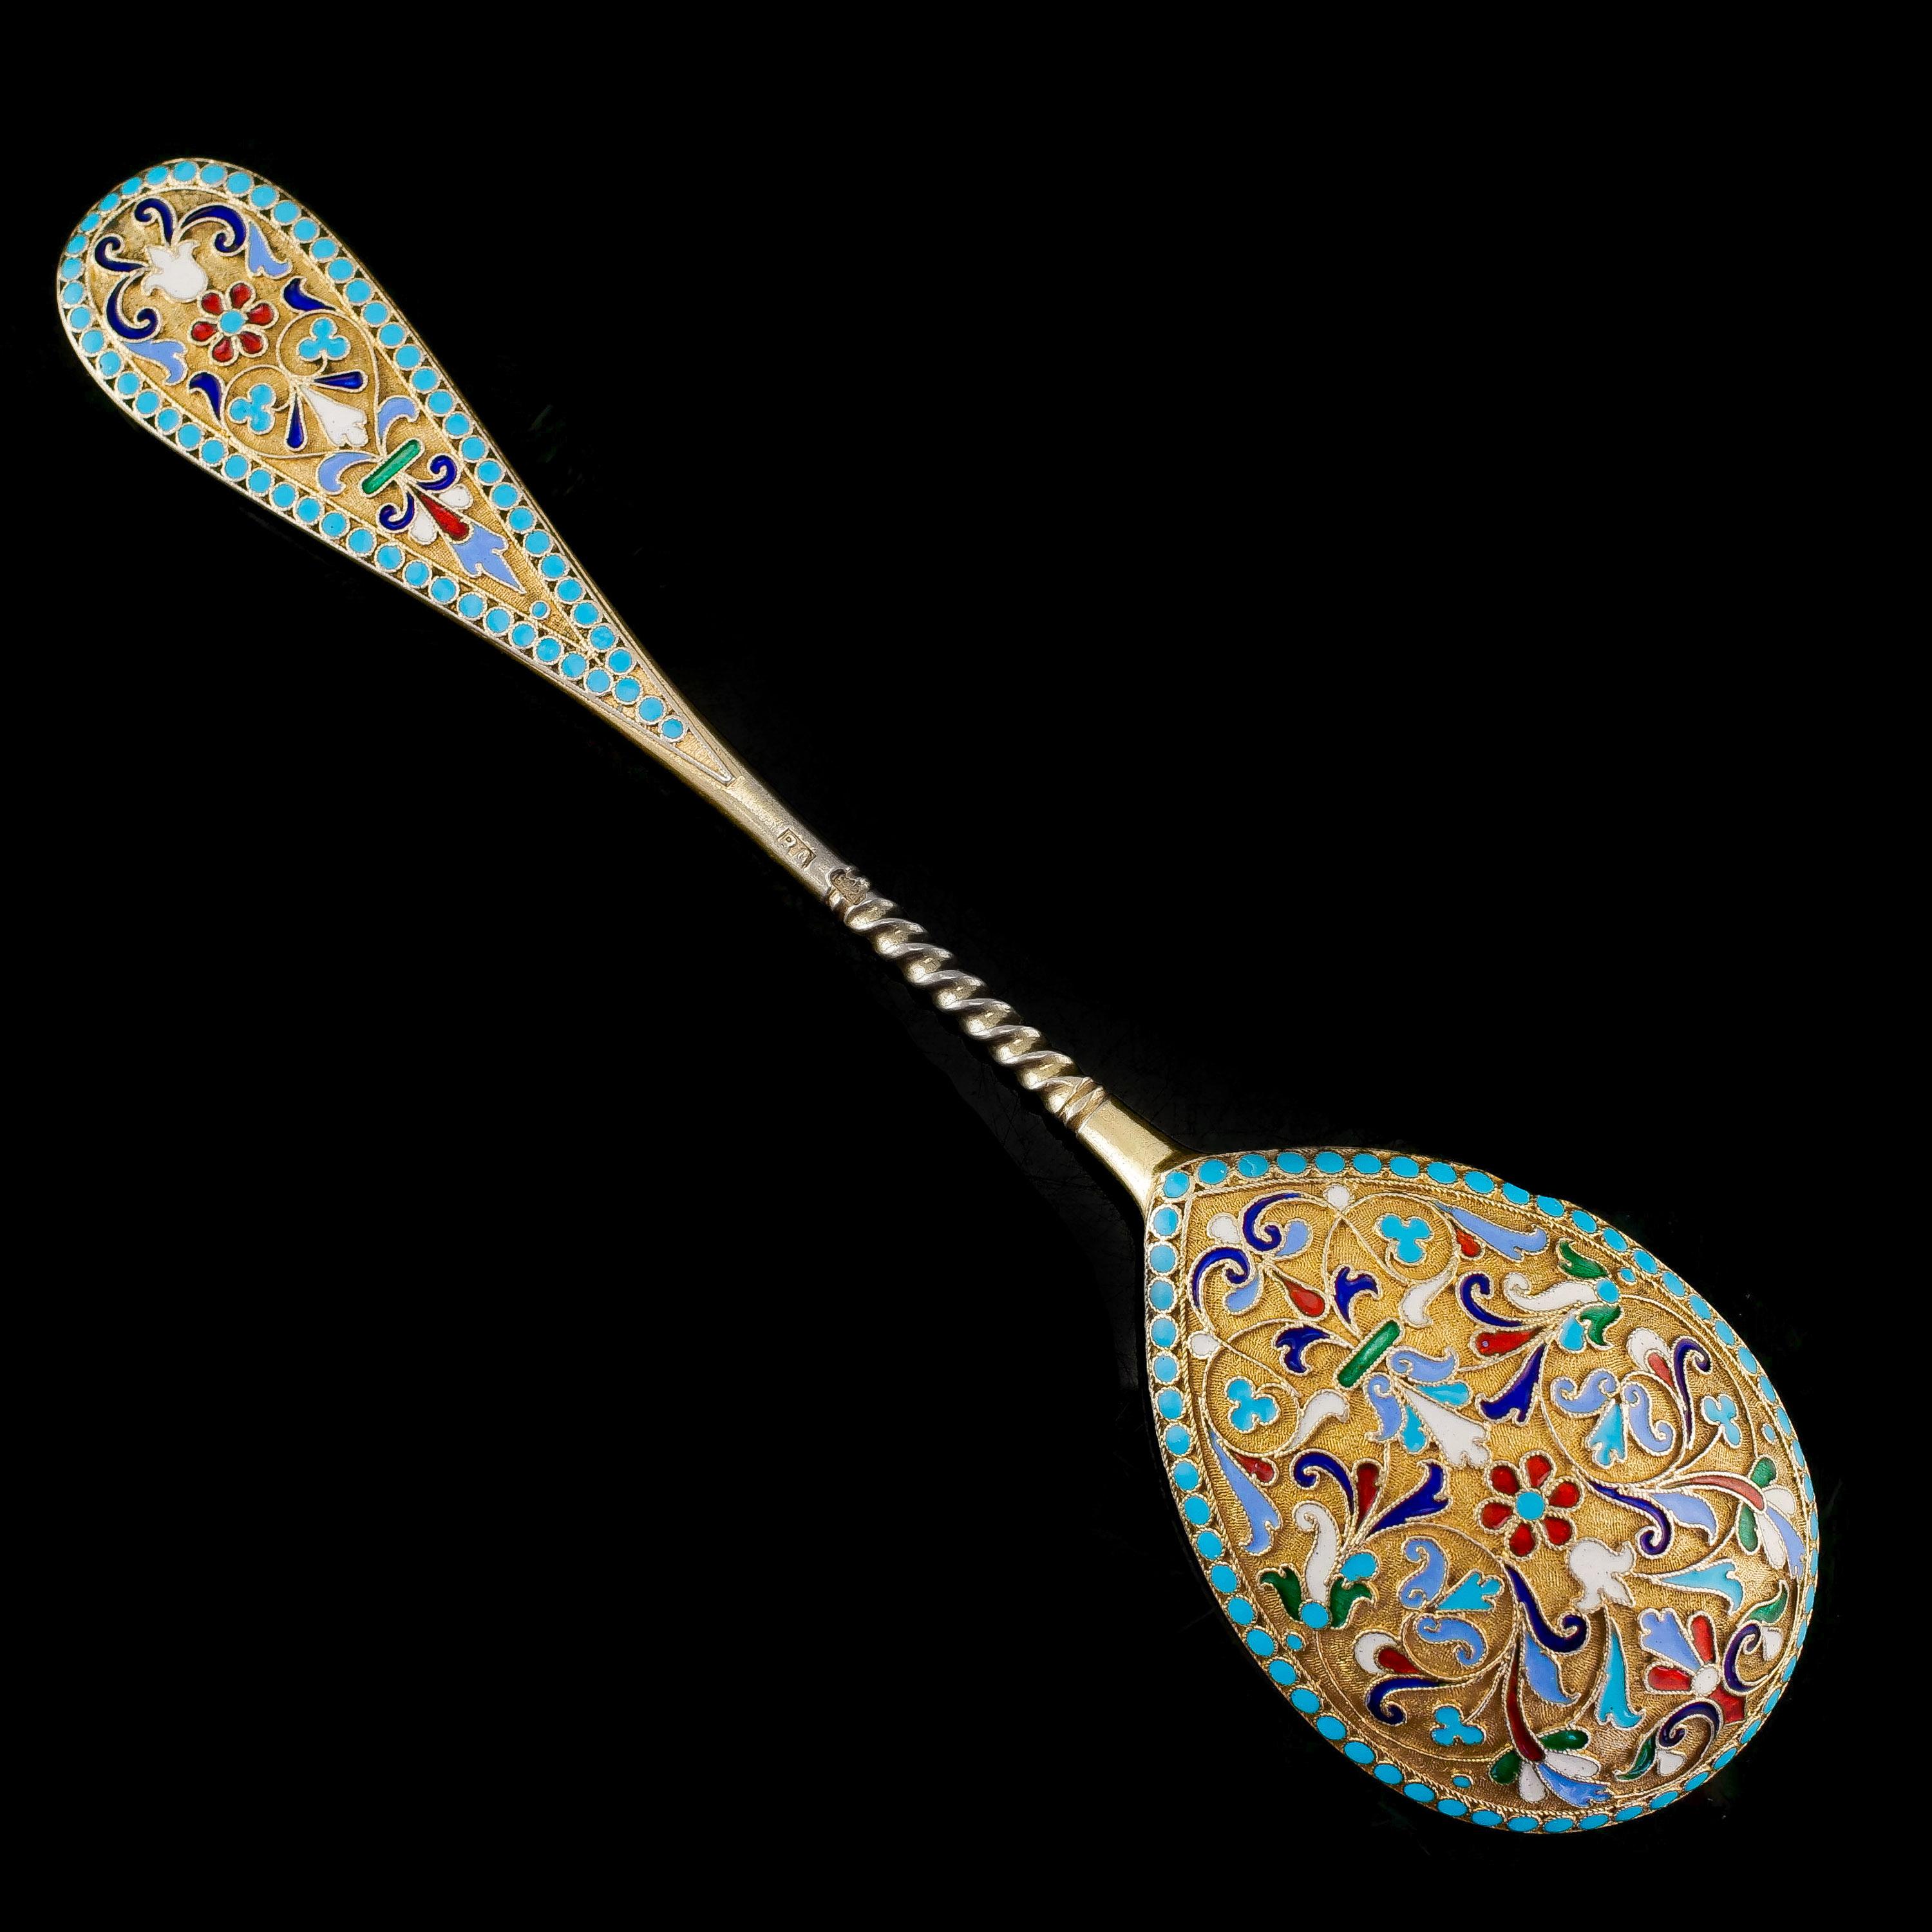 We are delighted to offer this large Imperial Russian silver cloisonne enamel spoon likely by either Vasili Akimov/Vasili Andreyev.
 
The spoon's overall proportions are substantial and impressive in hand. Decorated from the tip to the handle, the